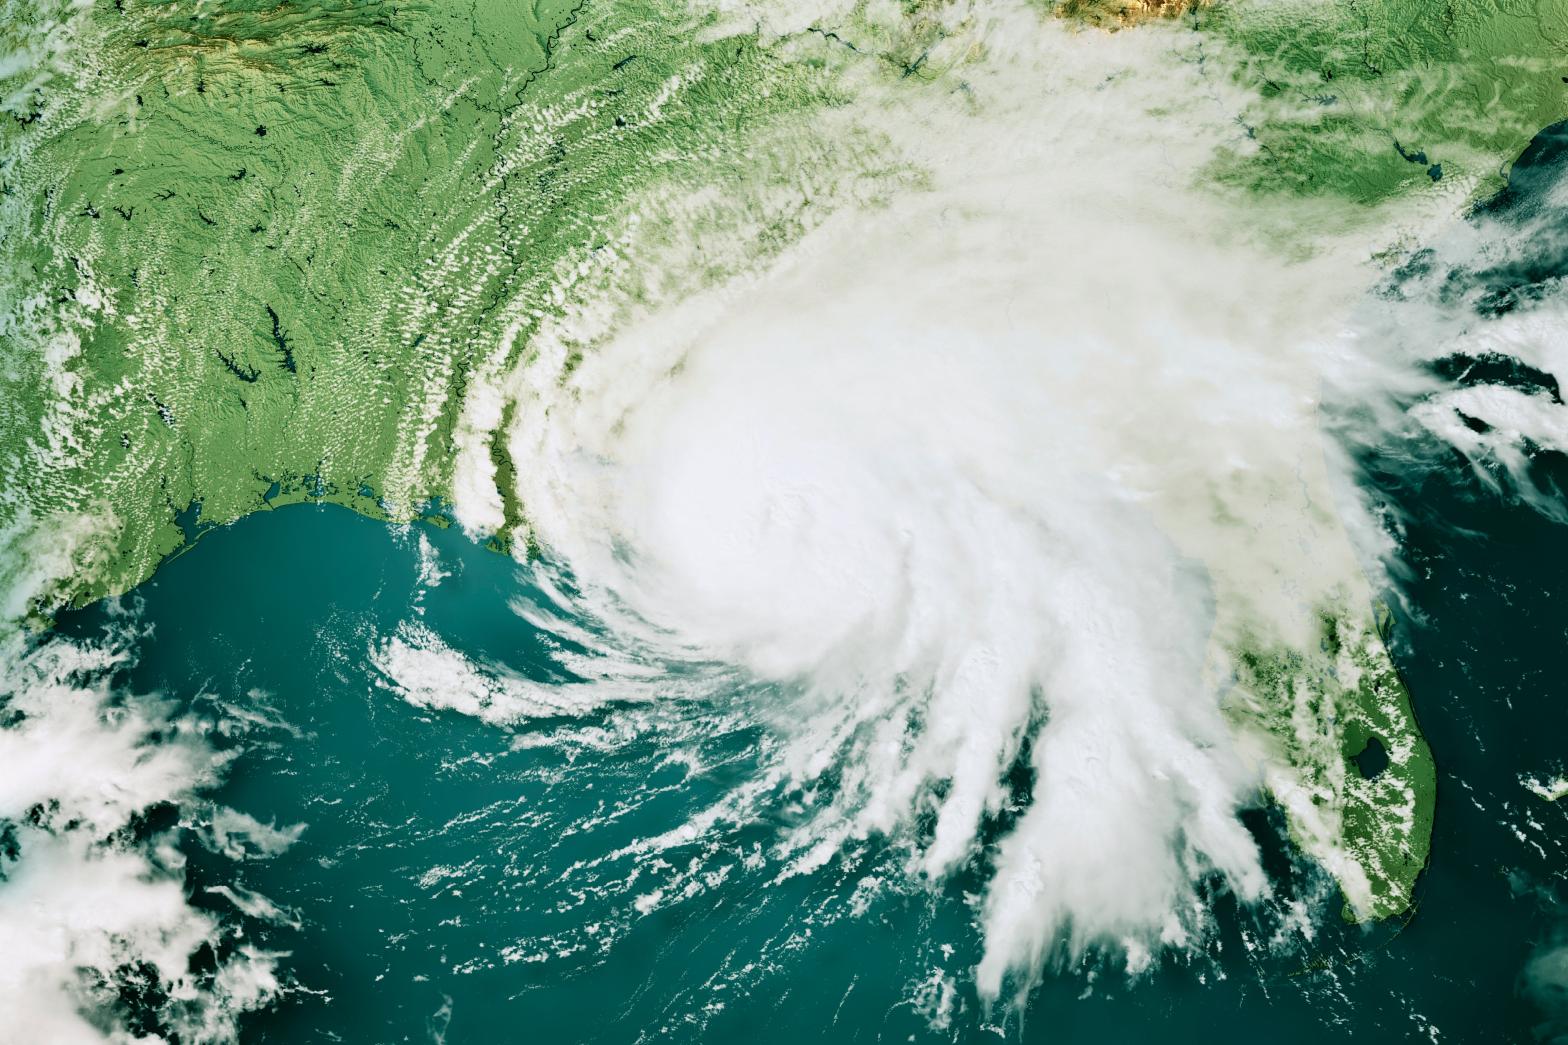 2020 hurricanes like Sally (pictured here) dropped extra rainfall thanks to human-caused climate change, new research finds. (Photo: FrankRamspott, Getty Images)